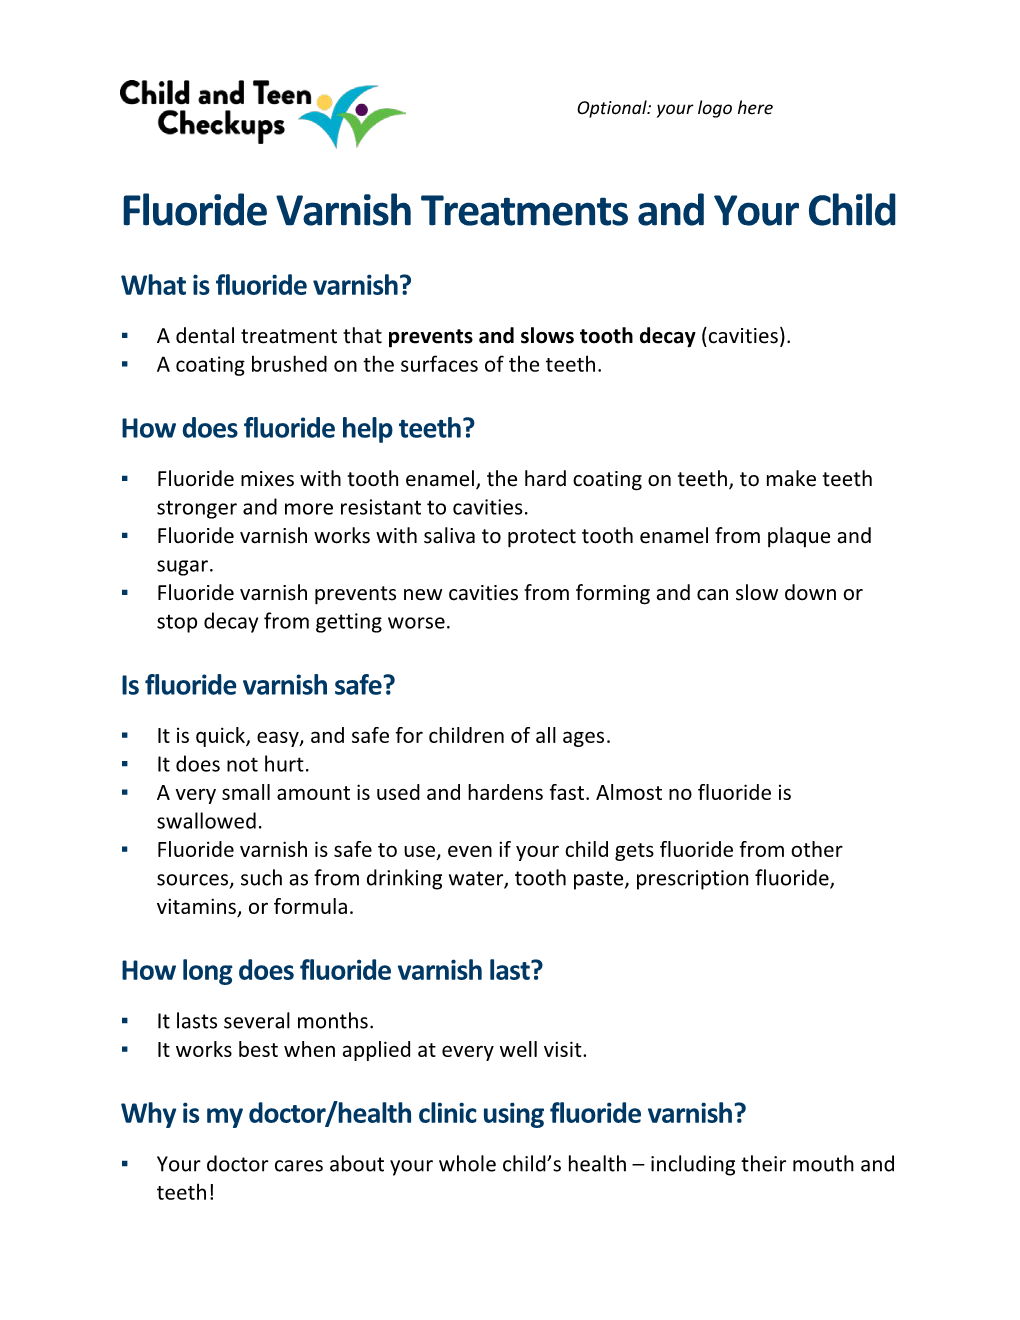 Fluoride Varnish Treatments and Your Child